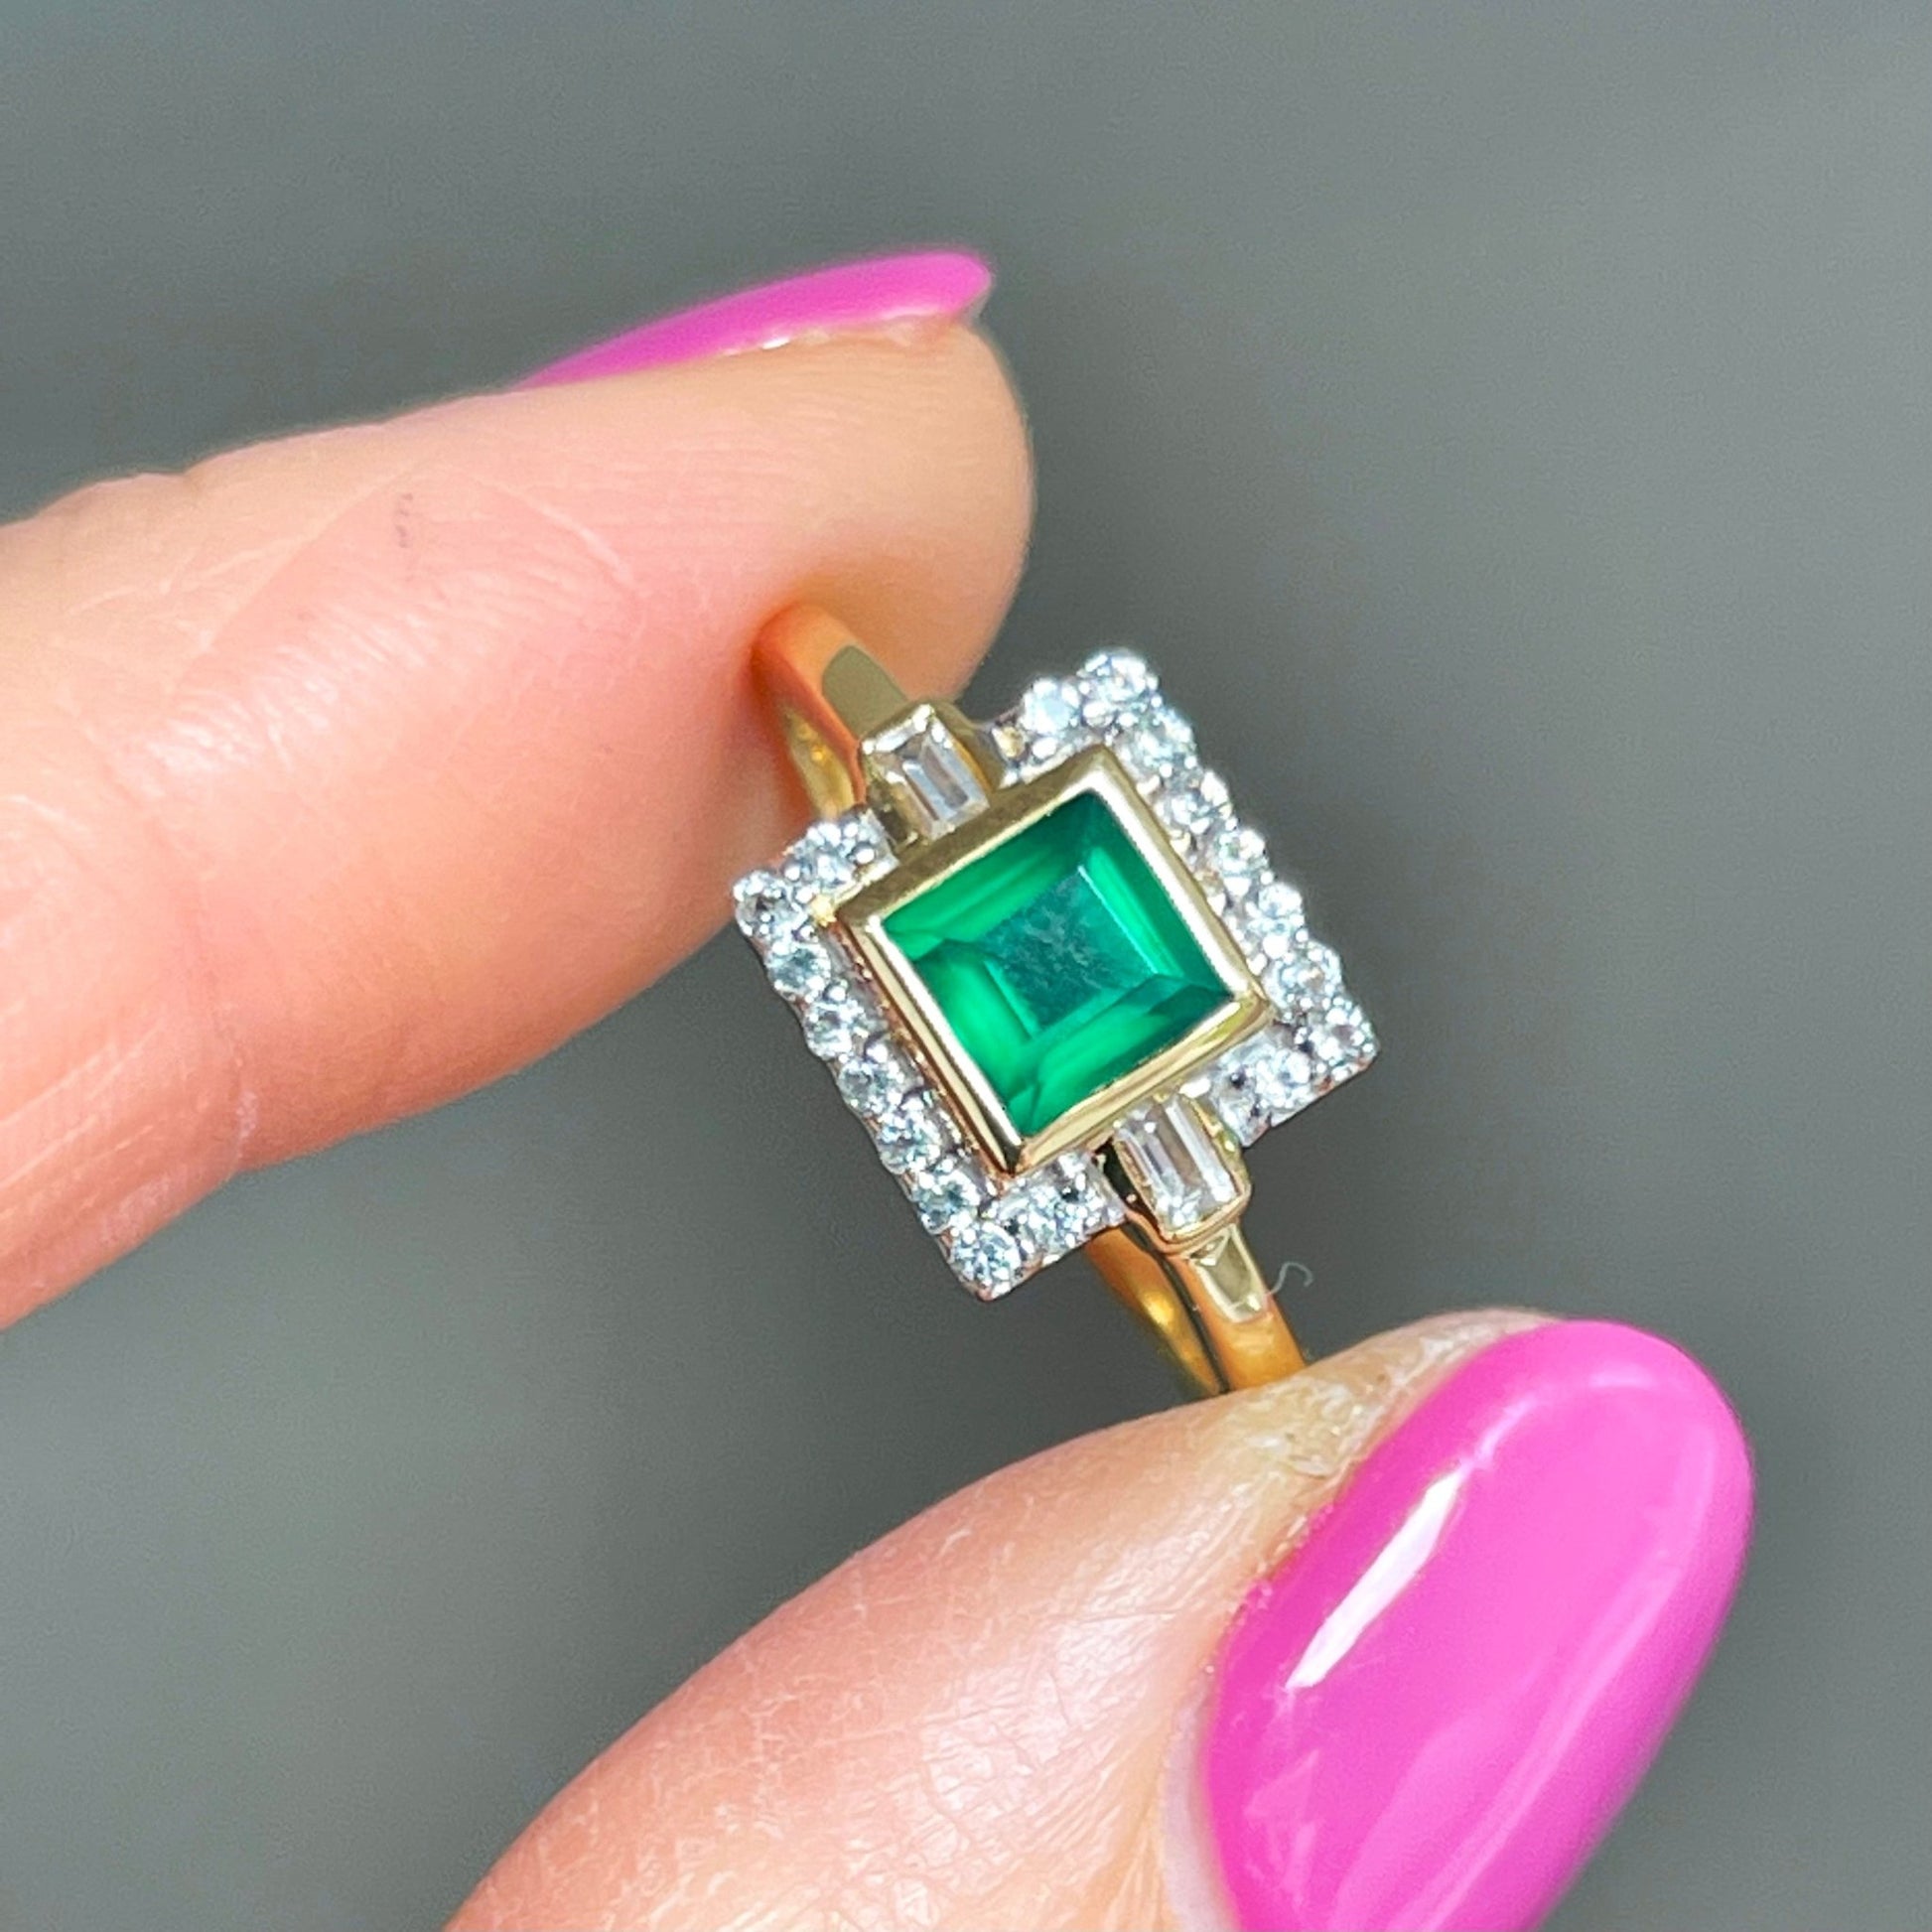 GREEN ONYX VINTAGE ART DECO STYLE RING - Fool's Gold Jewellery